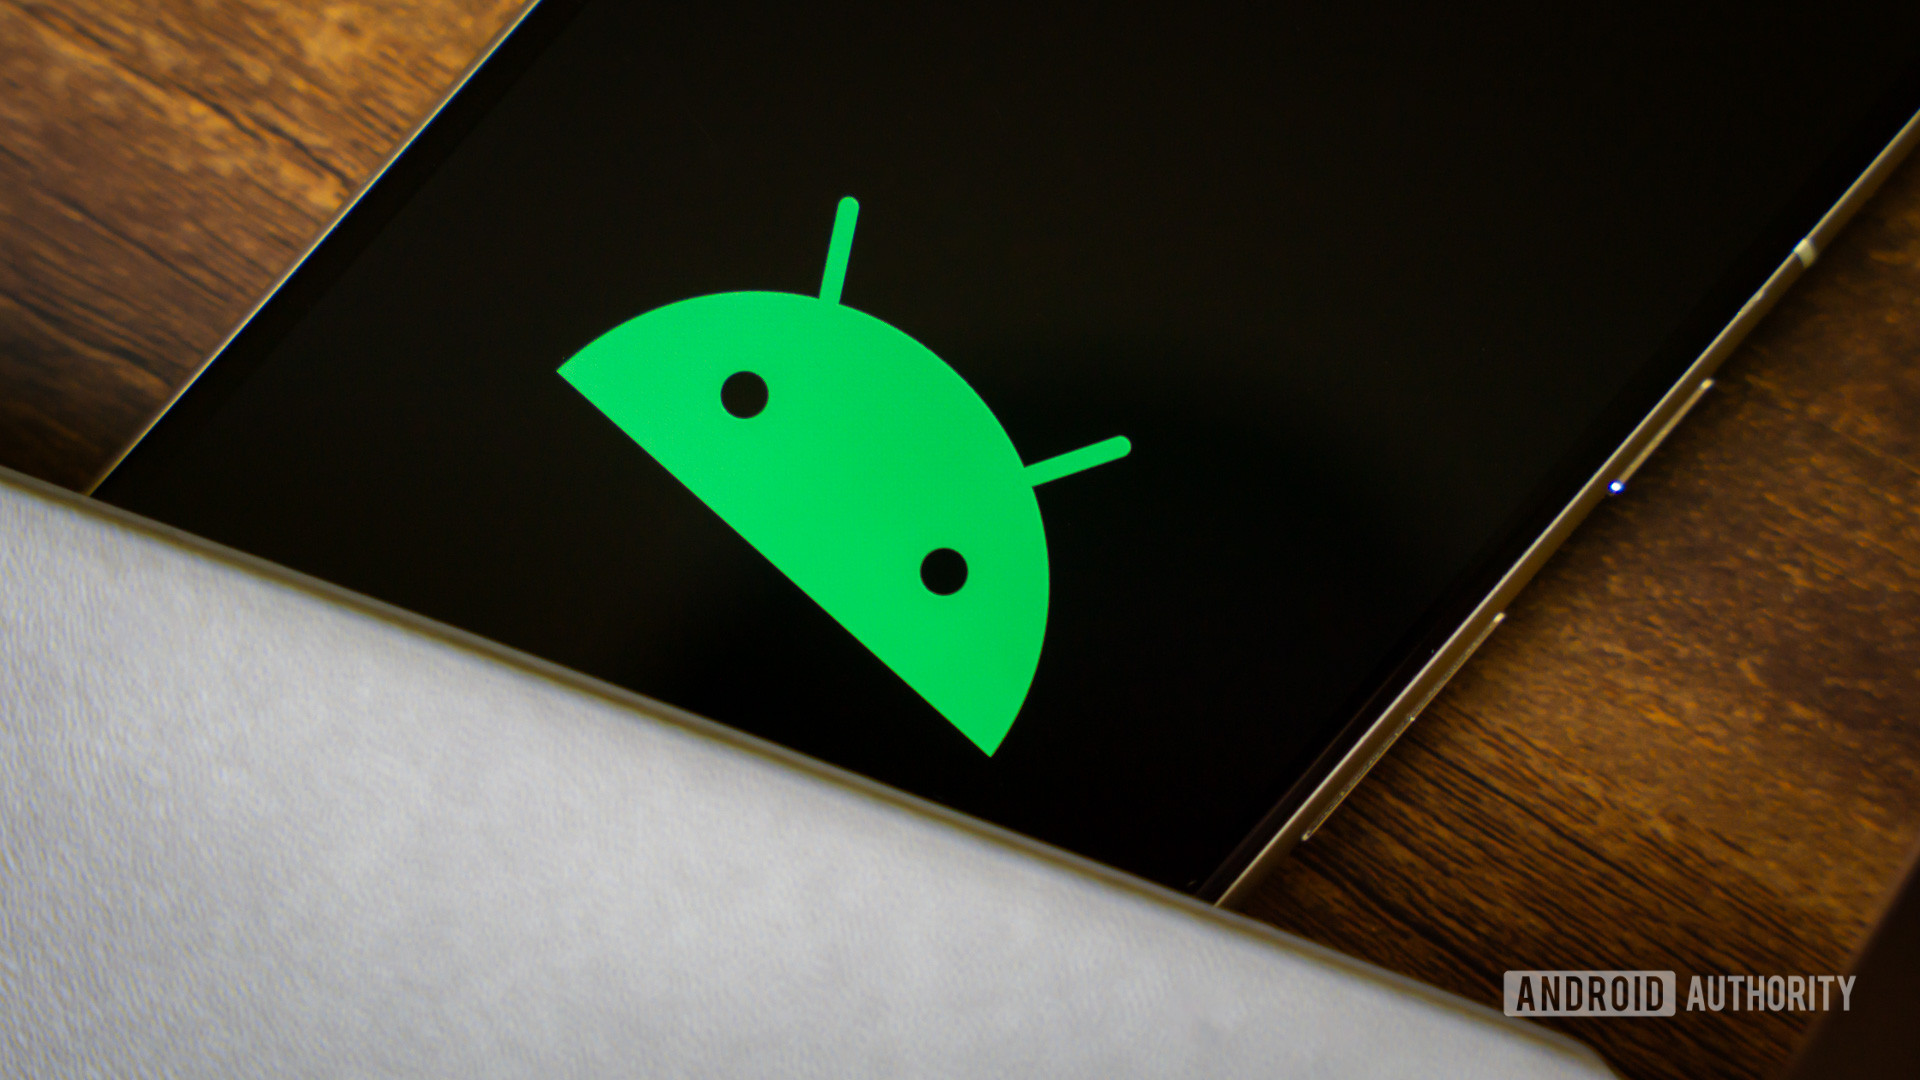 Android logo on smartphone stock photo (5)